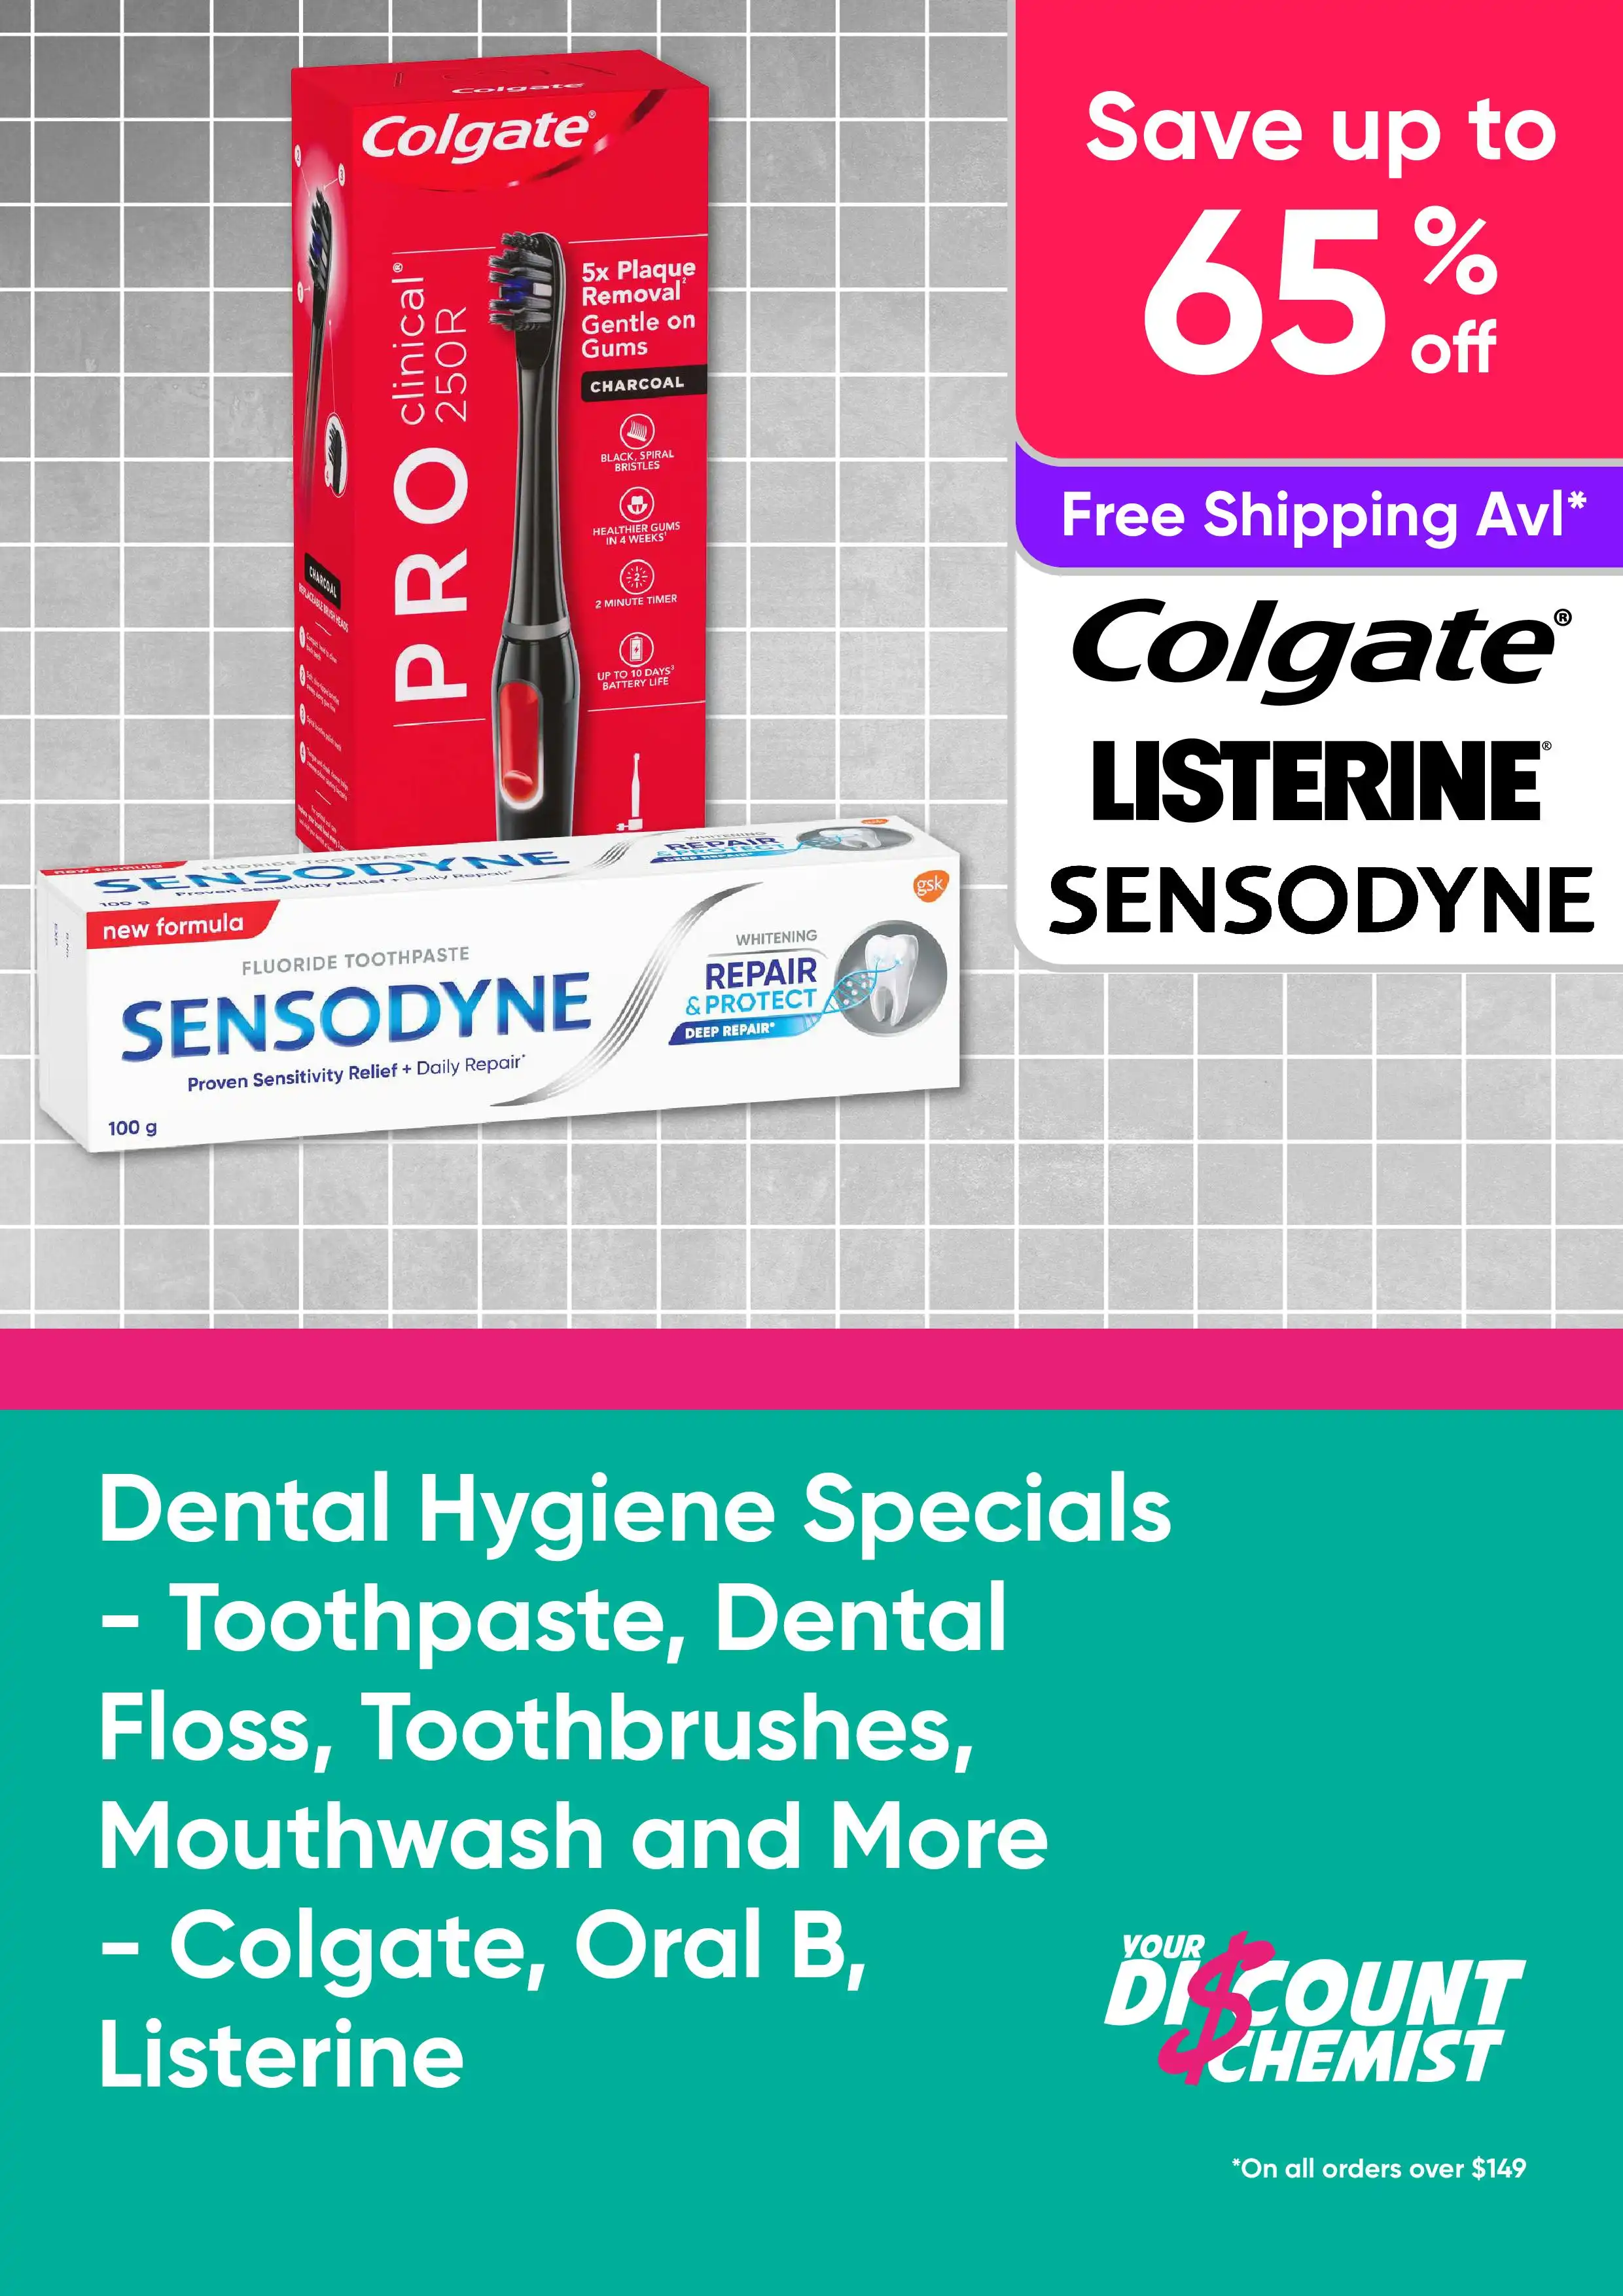 Dental Hygiene Specials - Toothpaste, Dental Floss, Toothbrushes, Mouthwash and More up to 30% off